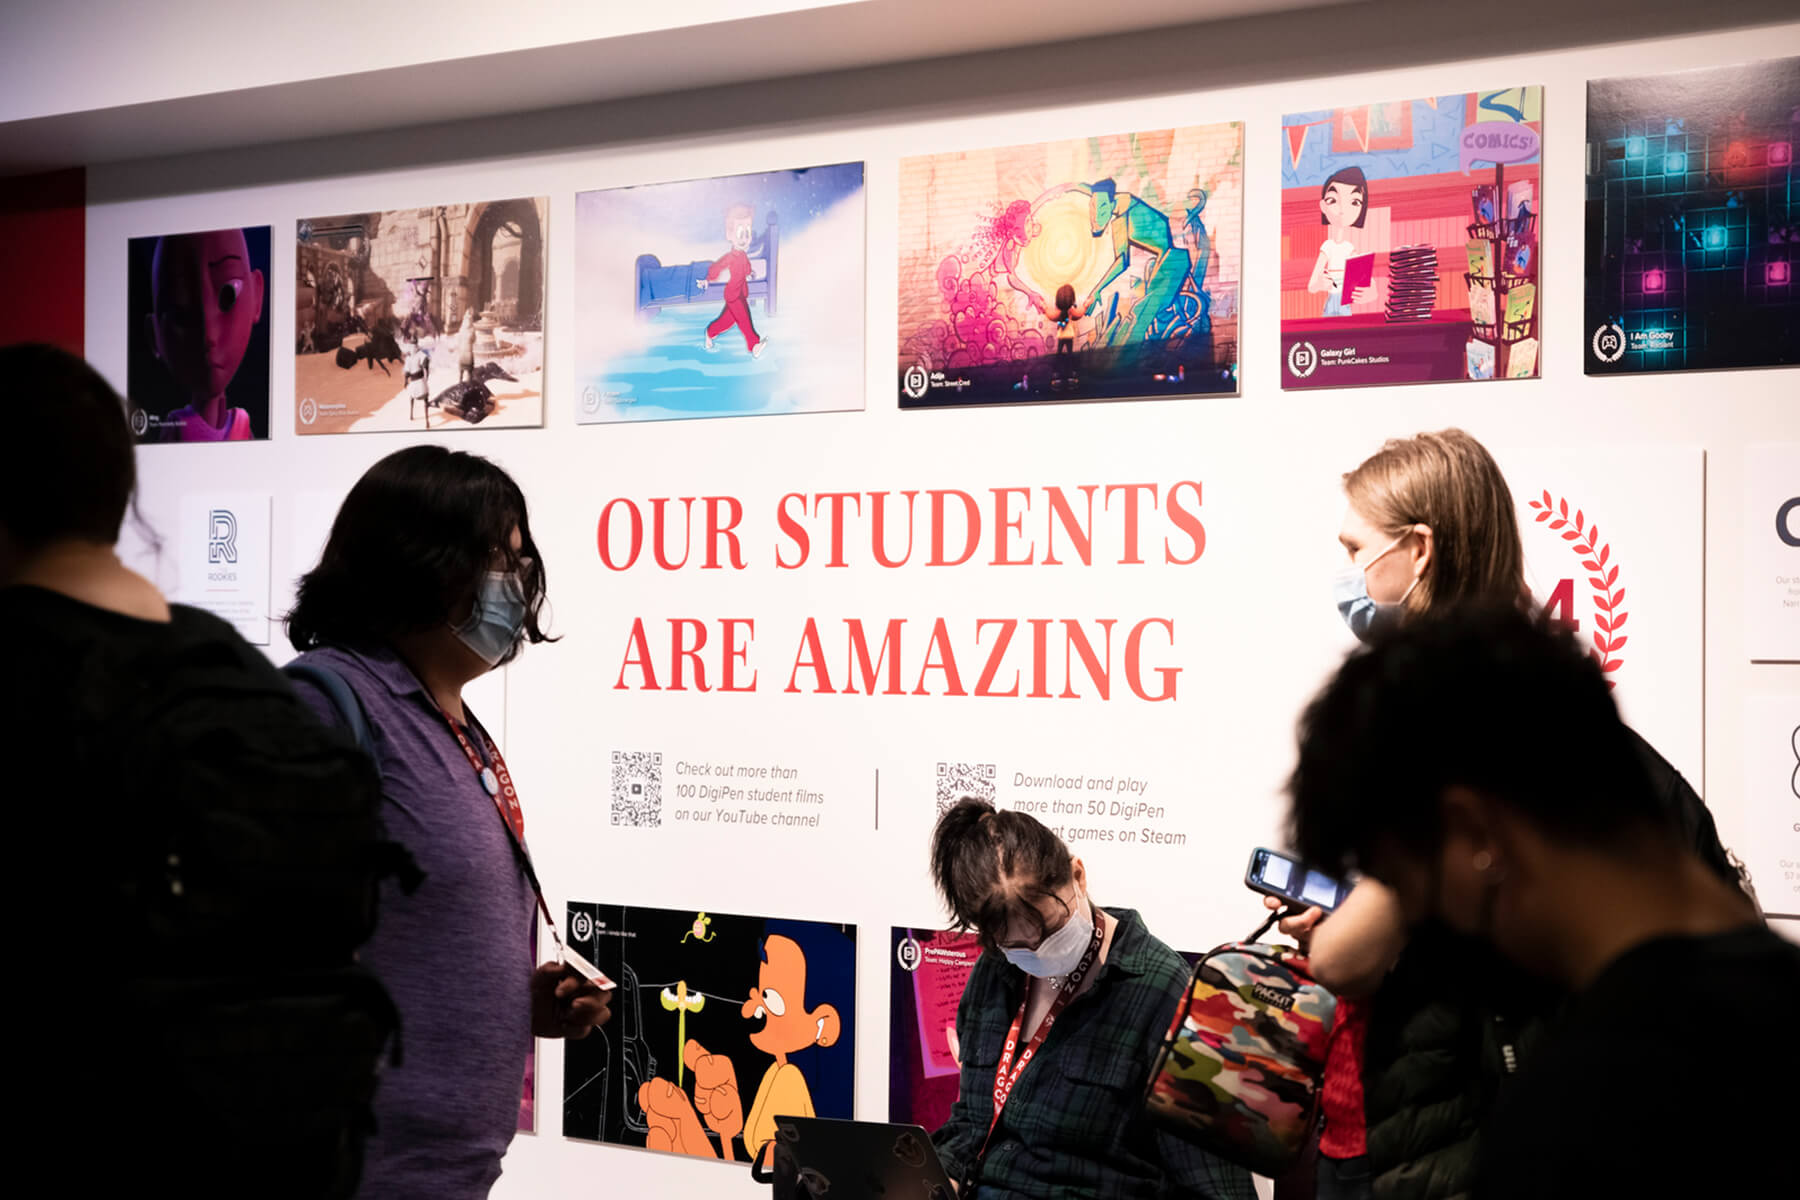 Students gather in front of a display that reads “Our Students are Amazing” on DigiPen’s campus.